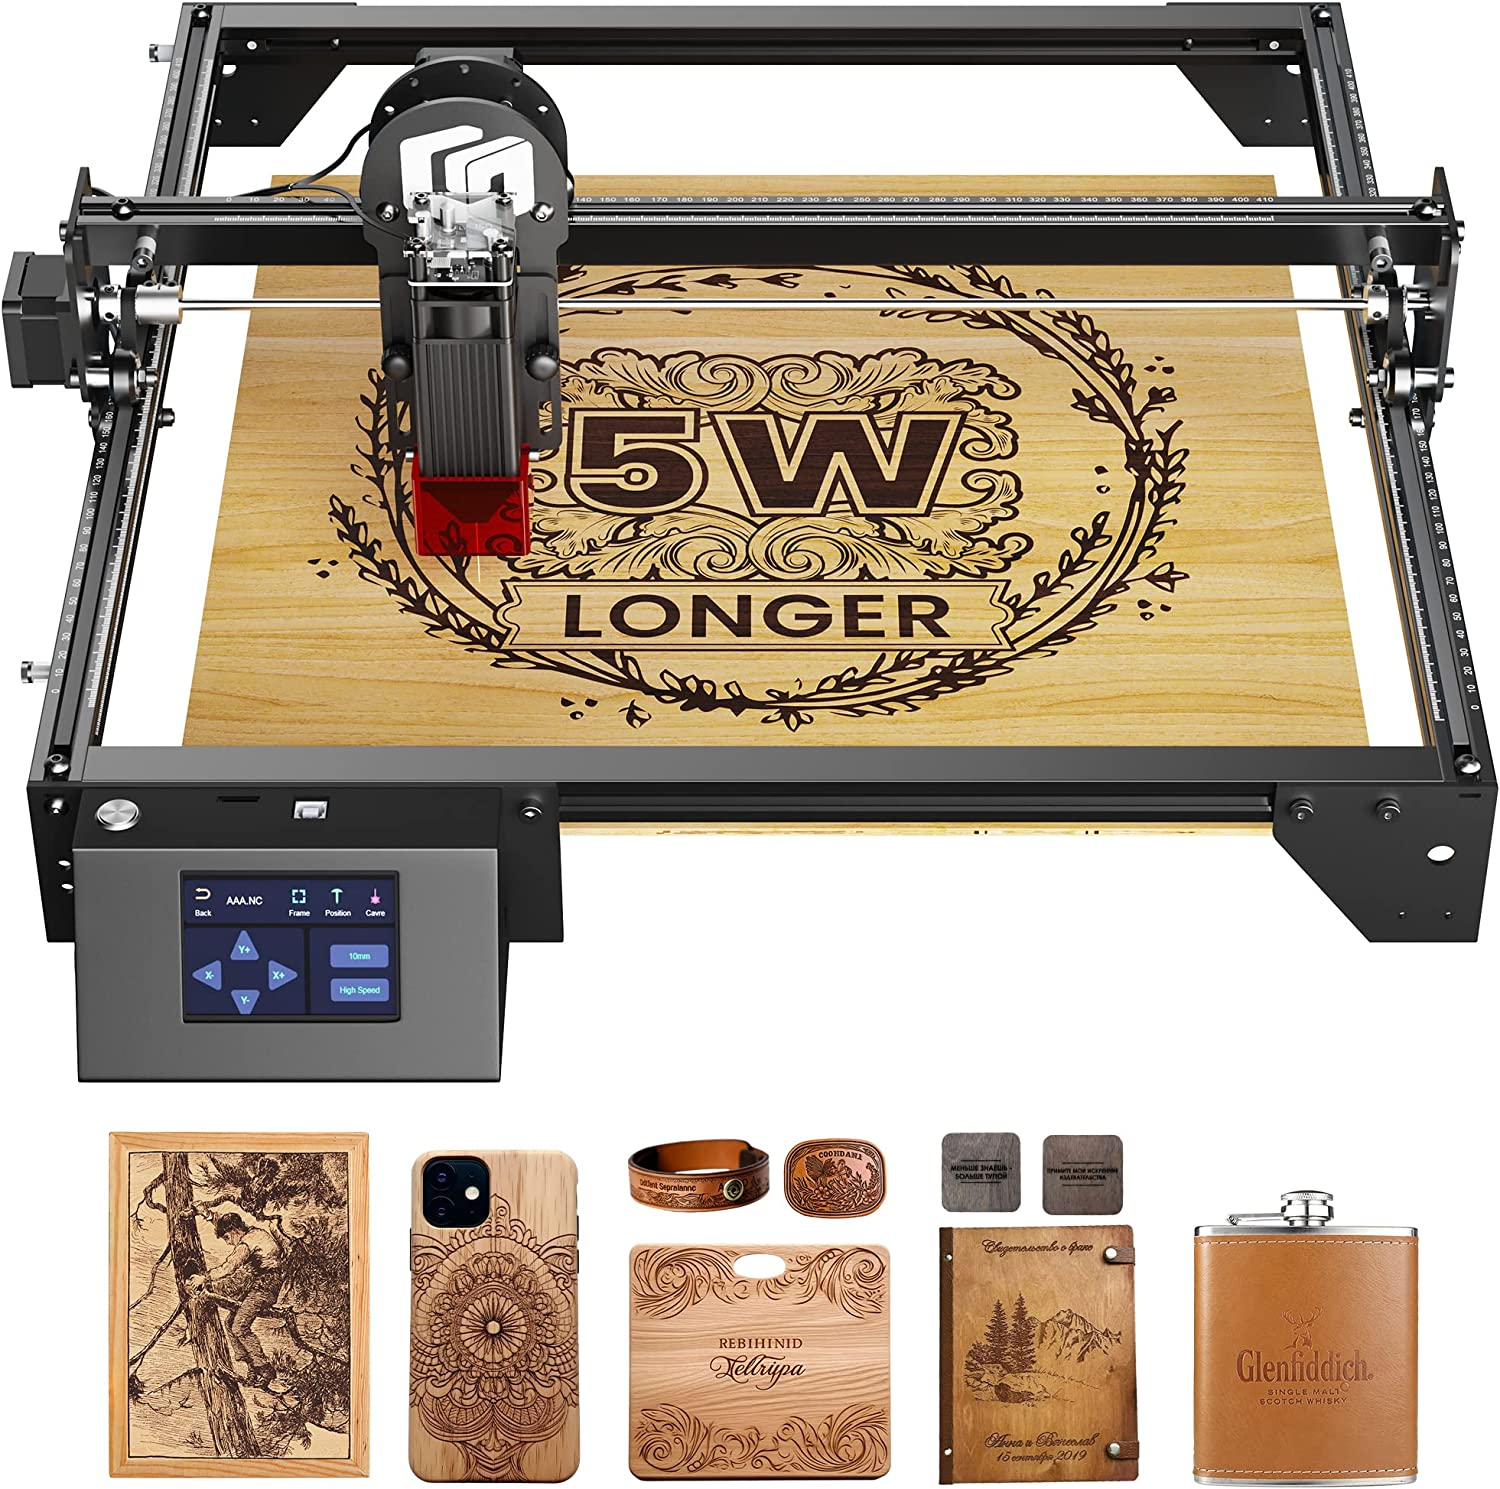 Longer RAY5 5W Laser Engraving Cutting Machine for Wood Metal 3.5-inch  Color Touch Screen 400x400mm Engraving Area